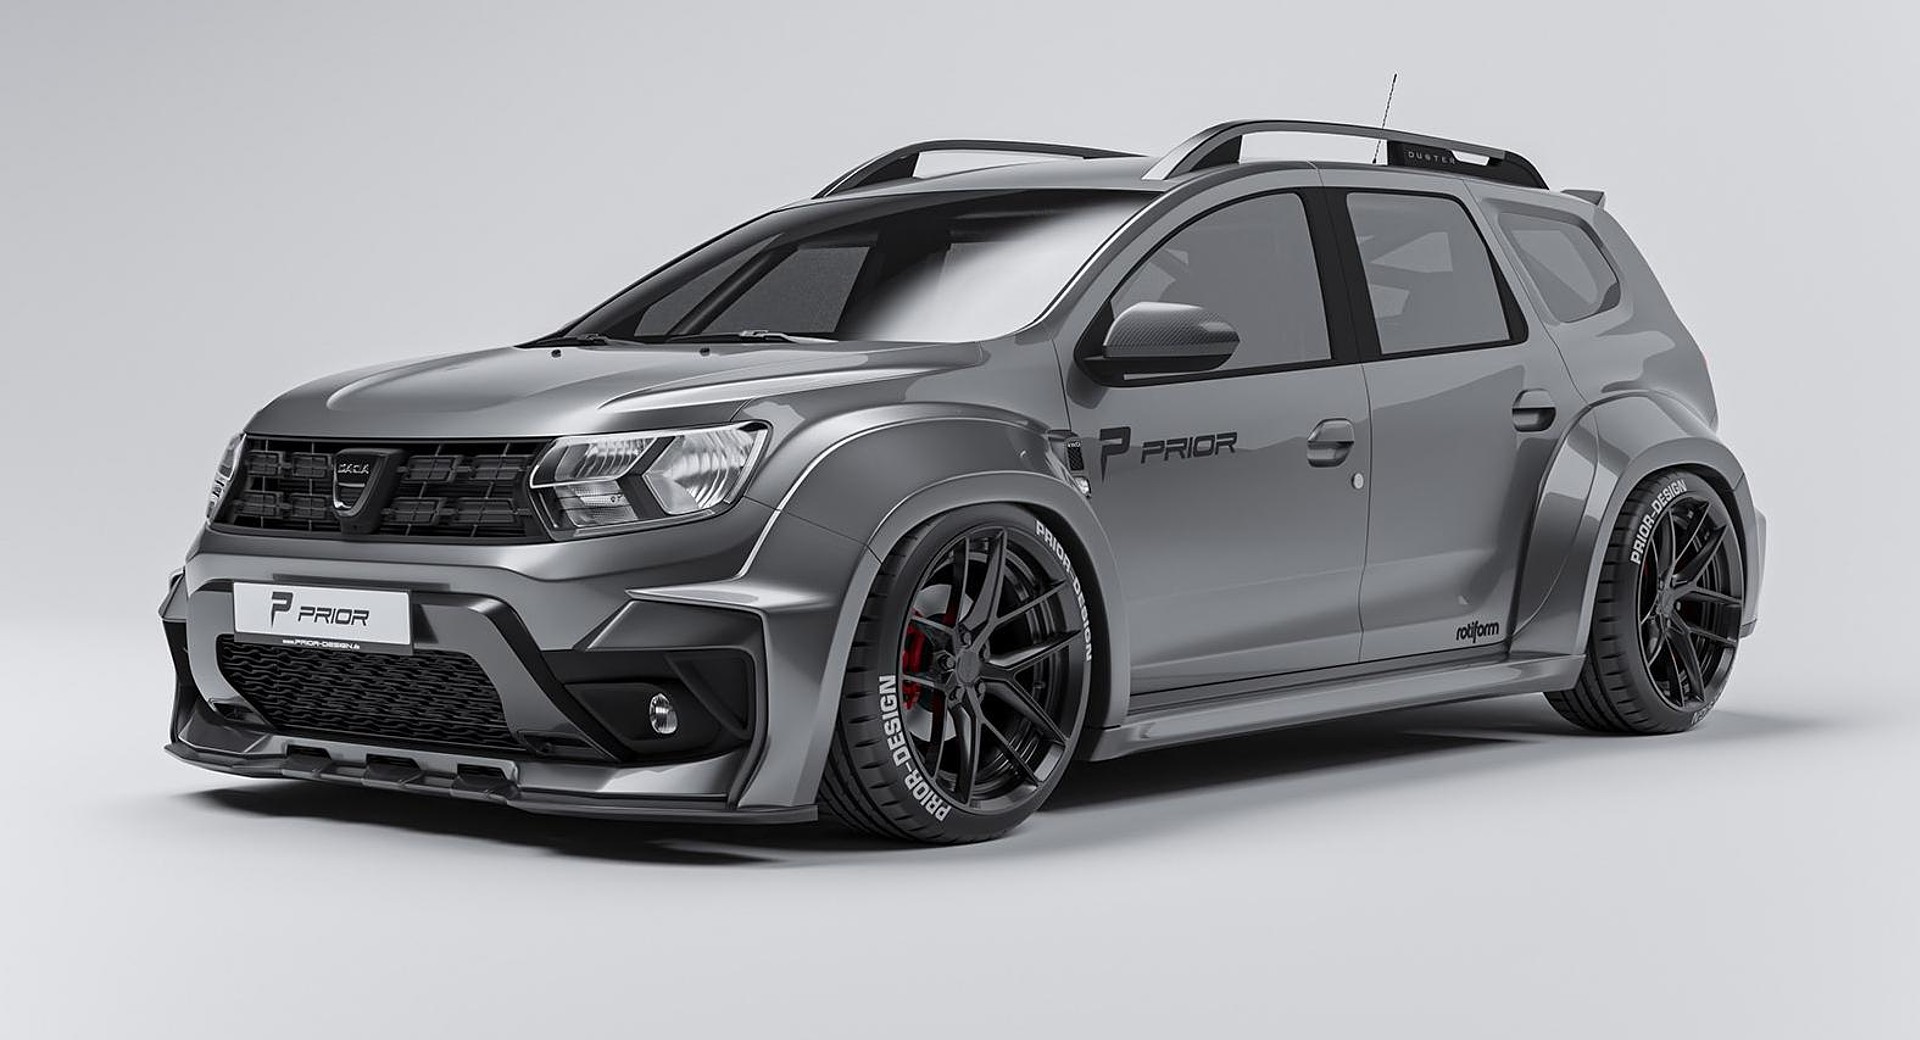 Dacia Duster Gets A Wild Bodykit From Prior Design For Less Than